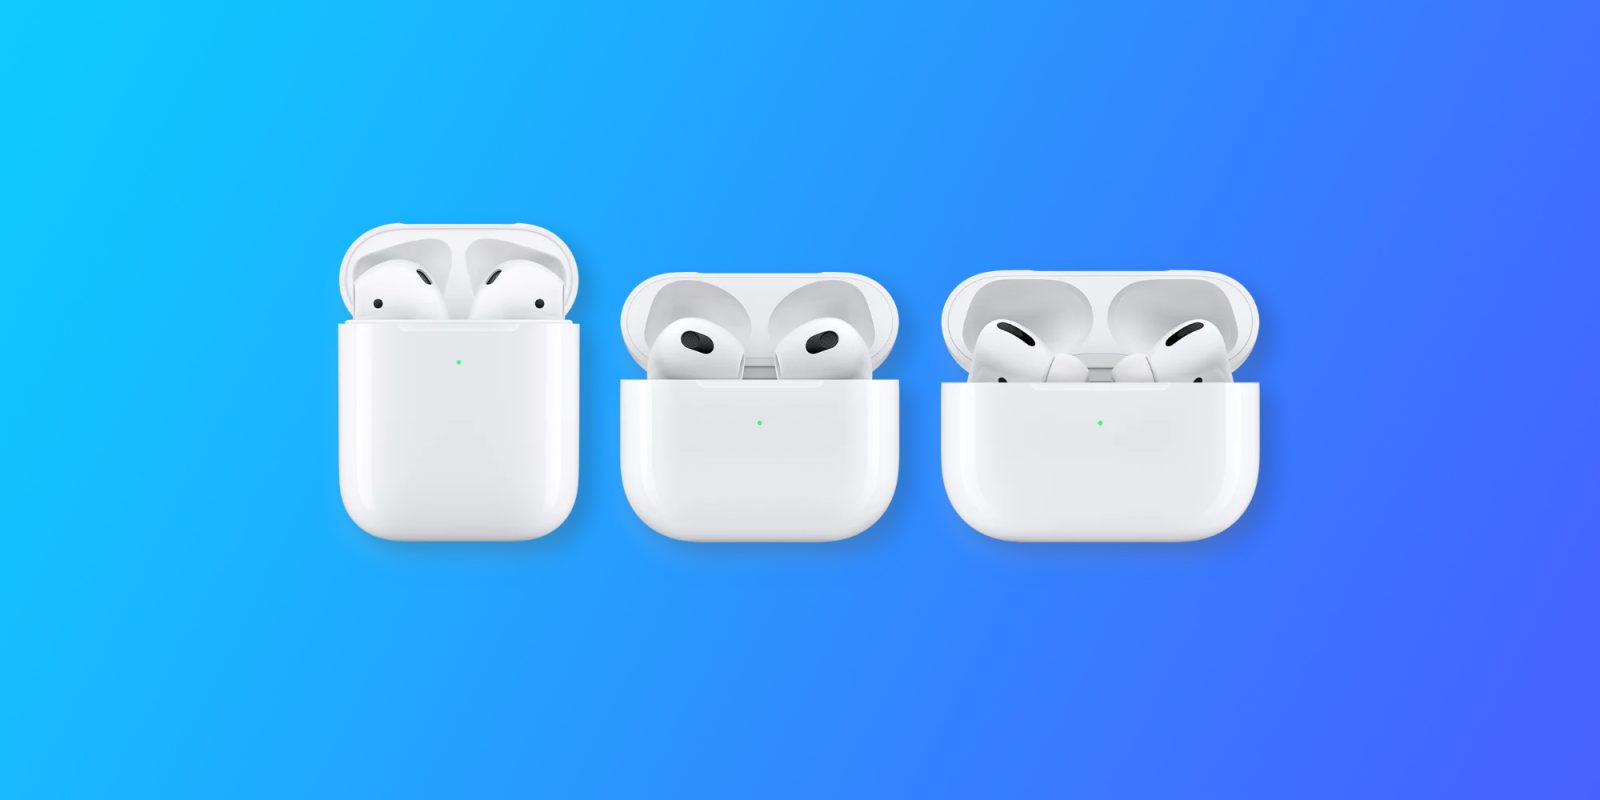 AirPods lineup